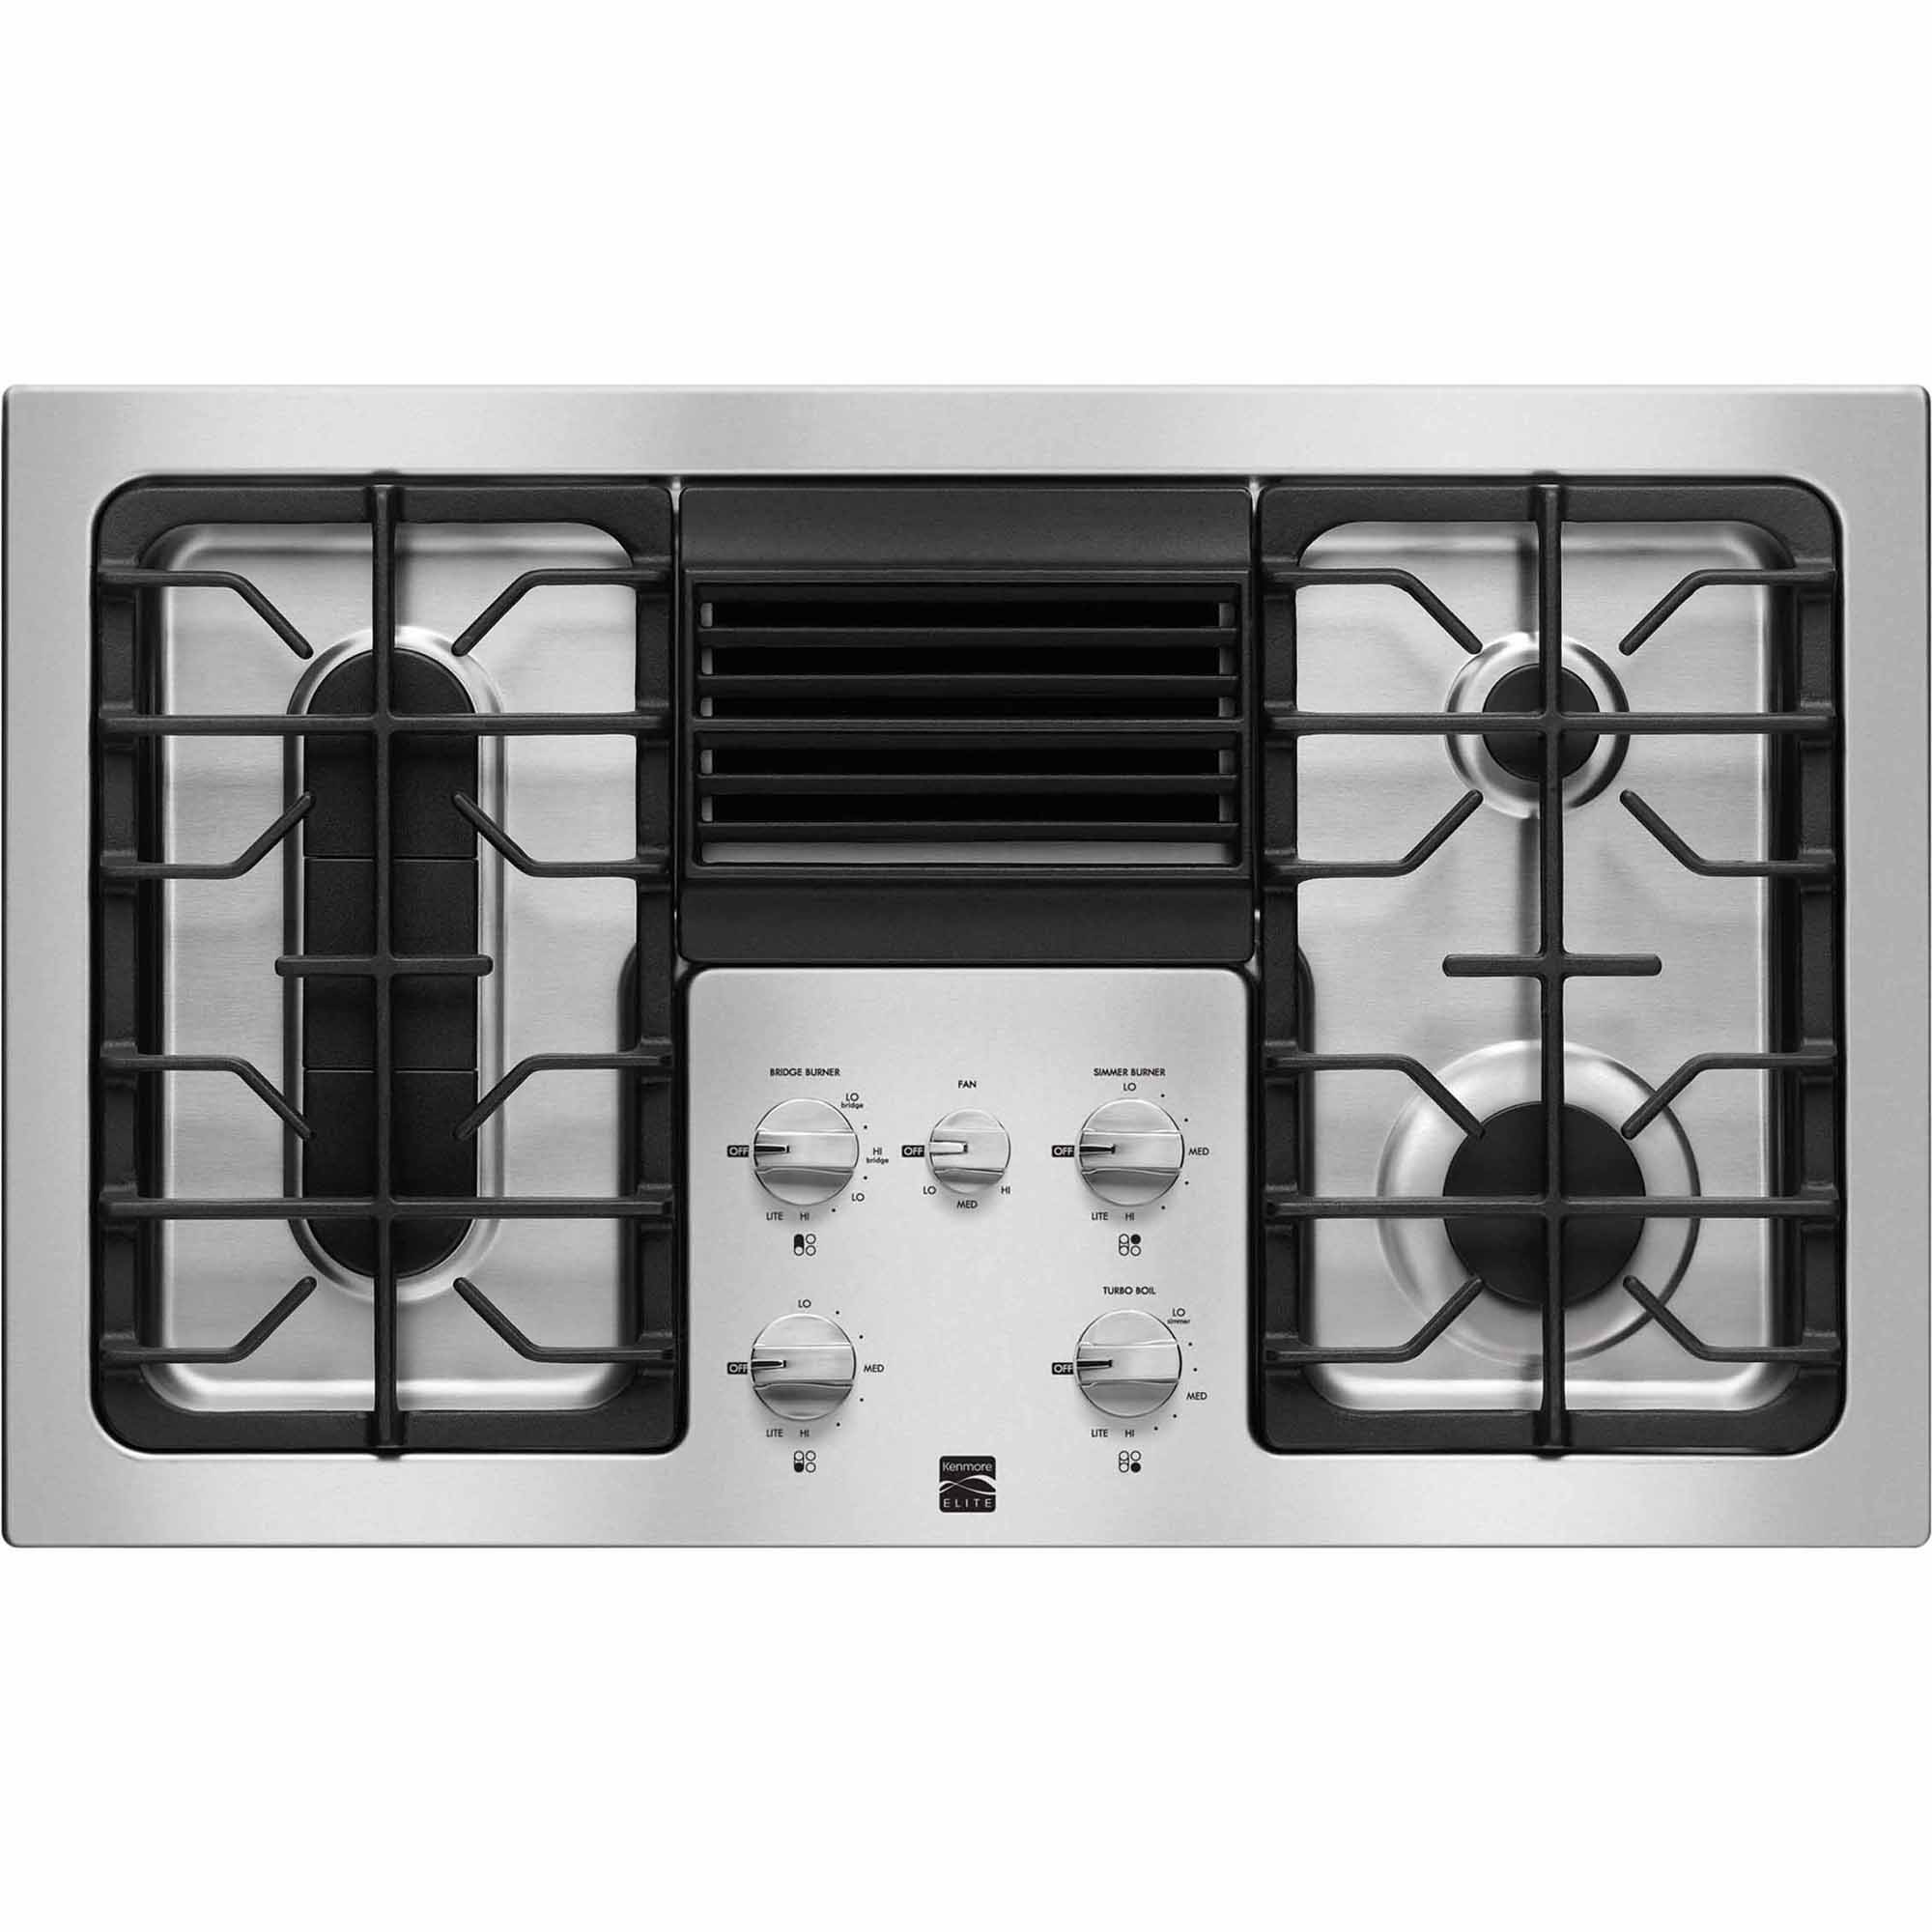 0012505562242 - 31123 36 DOWNDRAFT GAS COOKTOP, STAINLESS STEEL